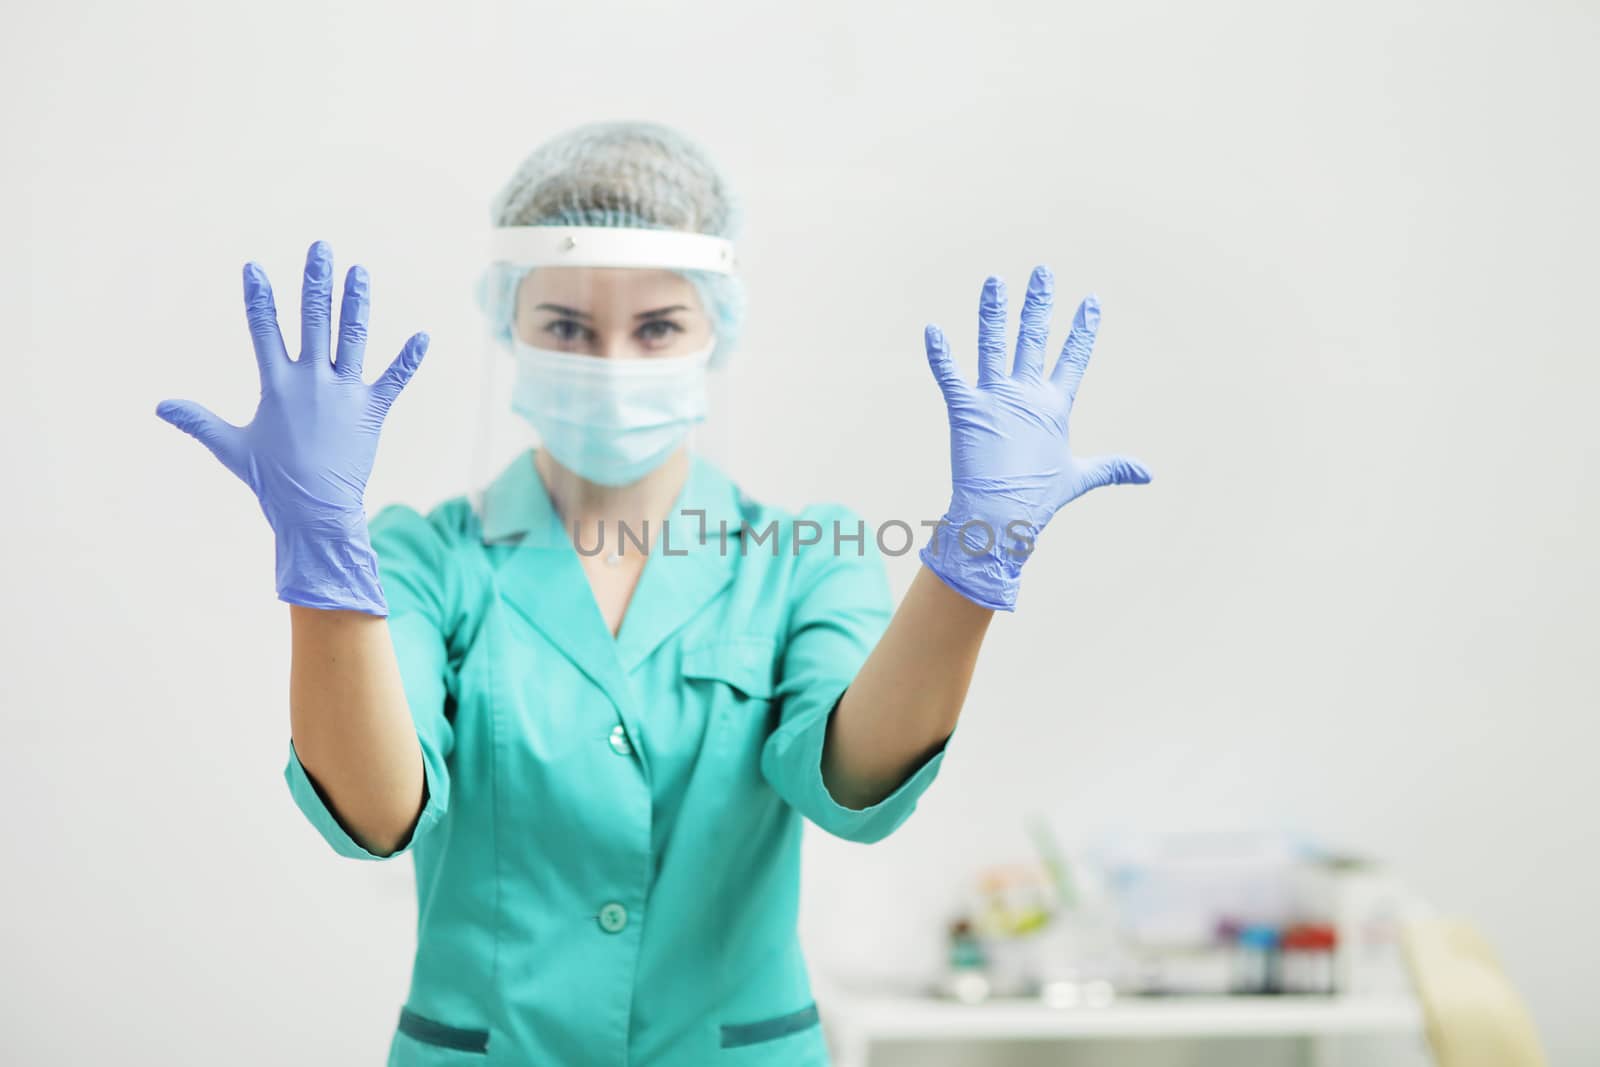 Female doctor or nurse in uniform, medical mask, face shield shows hands in gloves. Coronavirus COVID-19. Girl, woman.